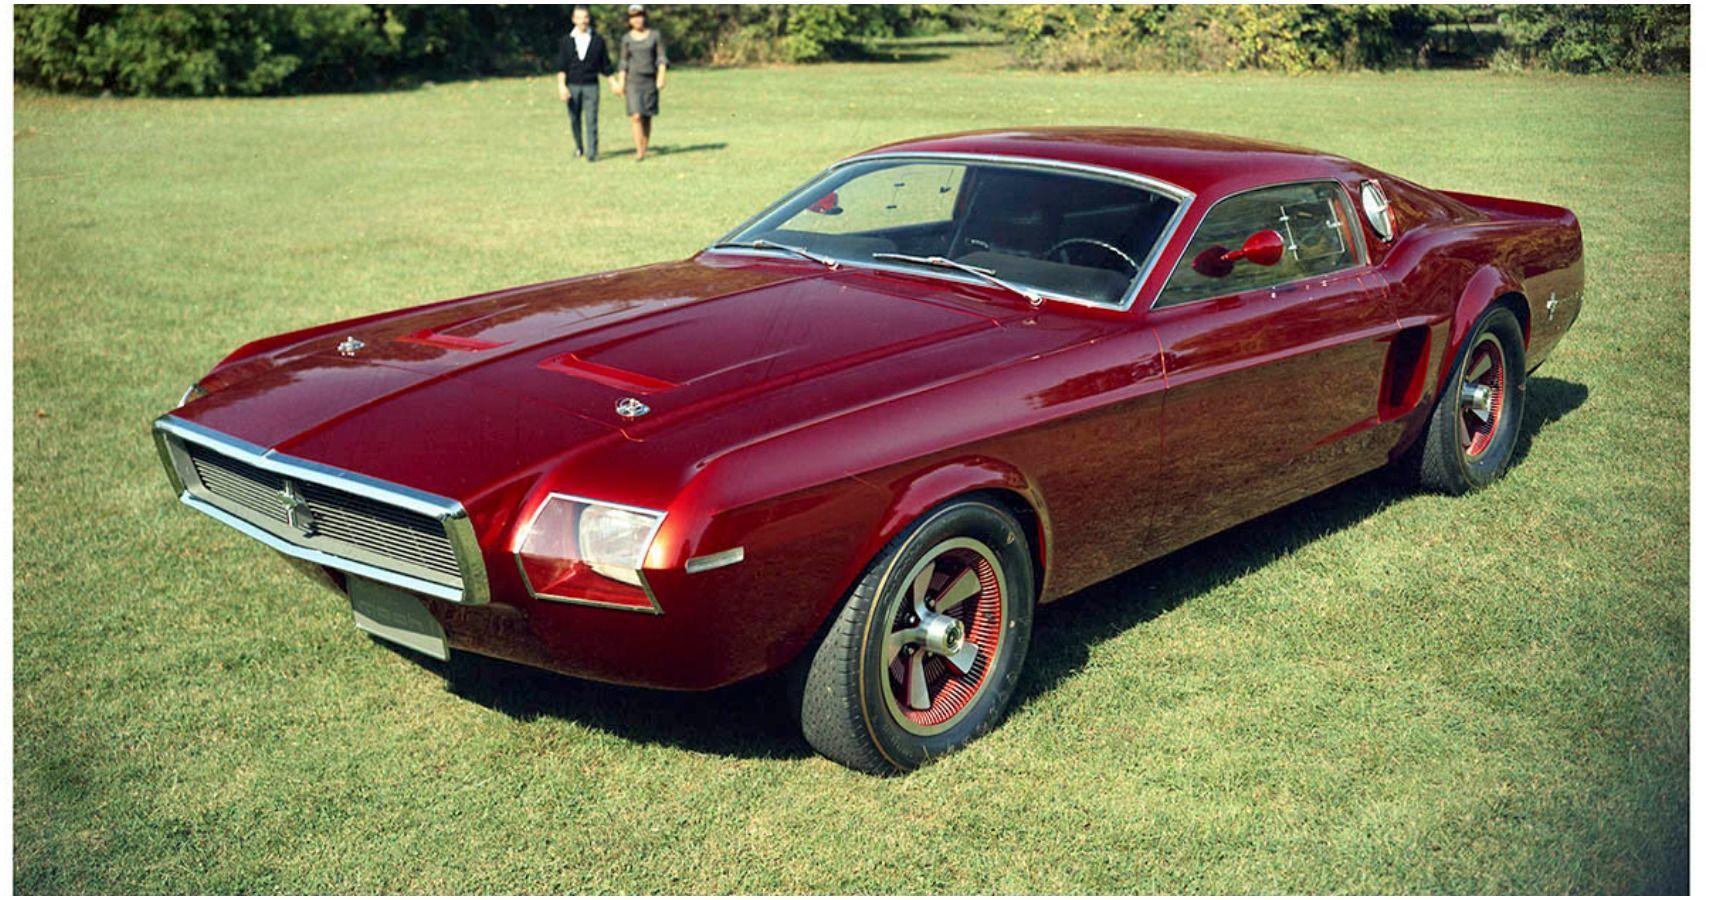 1967 Ford Allegro II Concept parked at a field